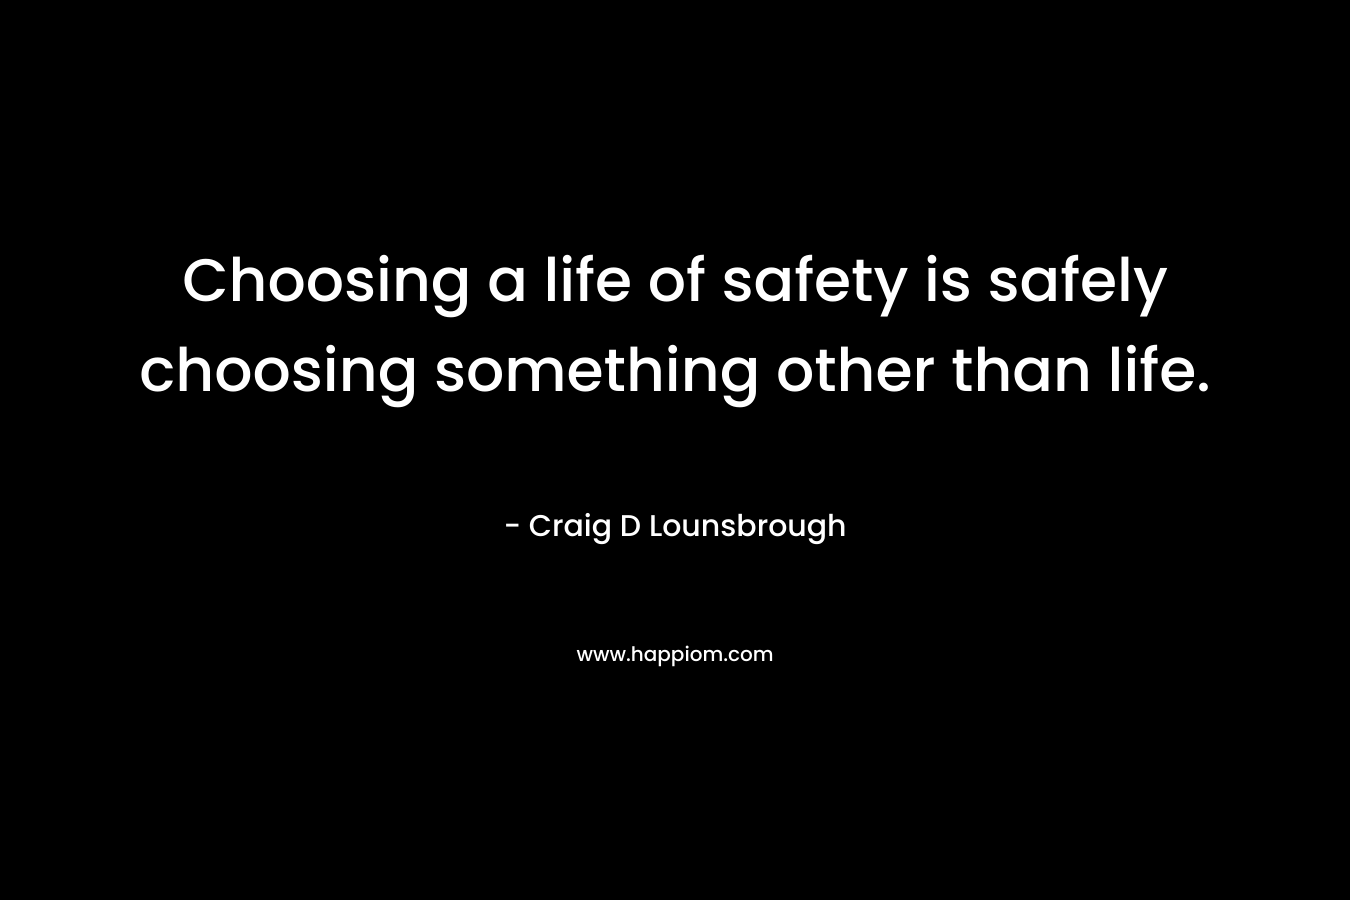 Choosing a life of safety is safely choosing something other than life.